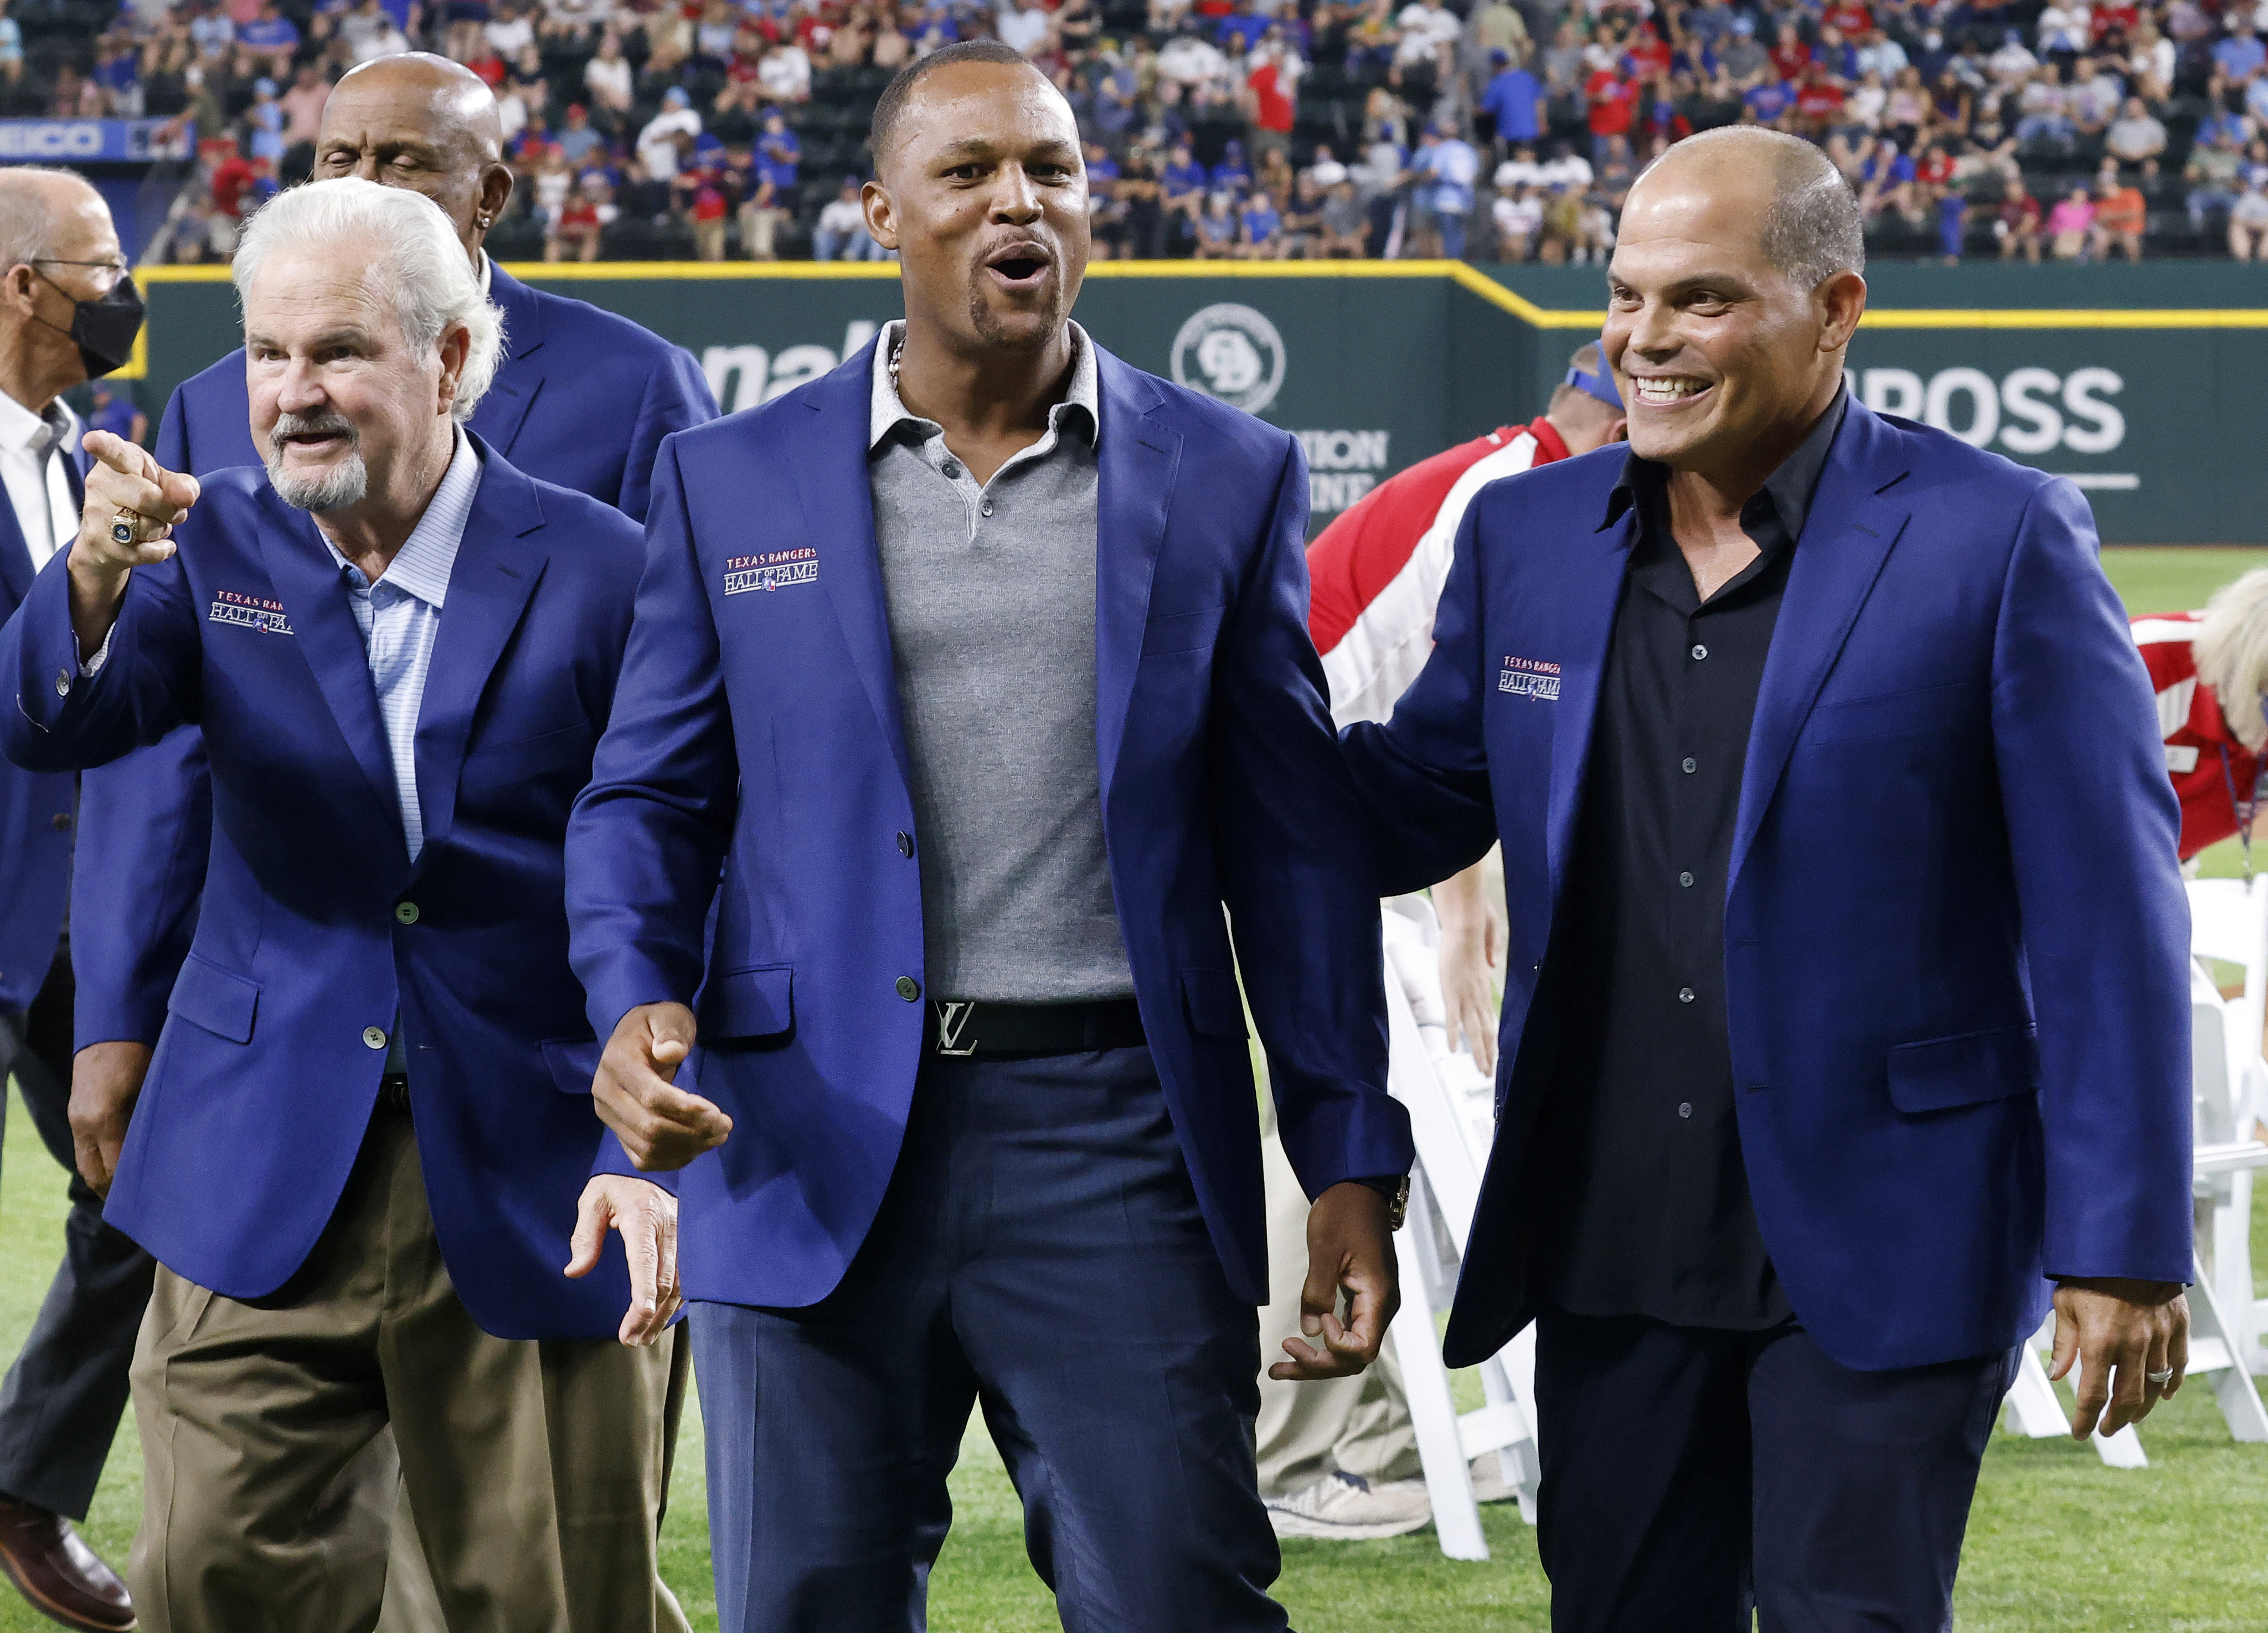 Adrián Beltré, Chuck Morgan to be inducted into Rangers Hall of Fame